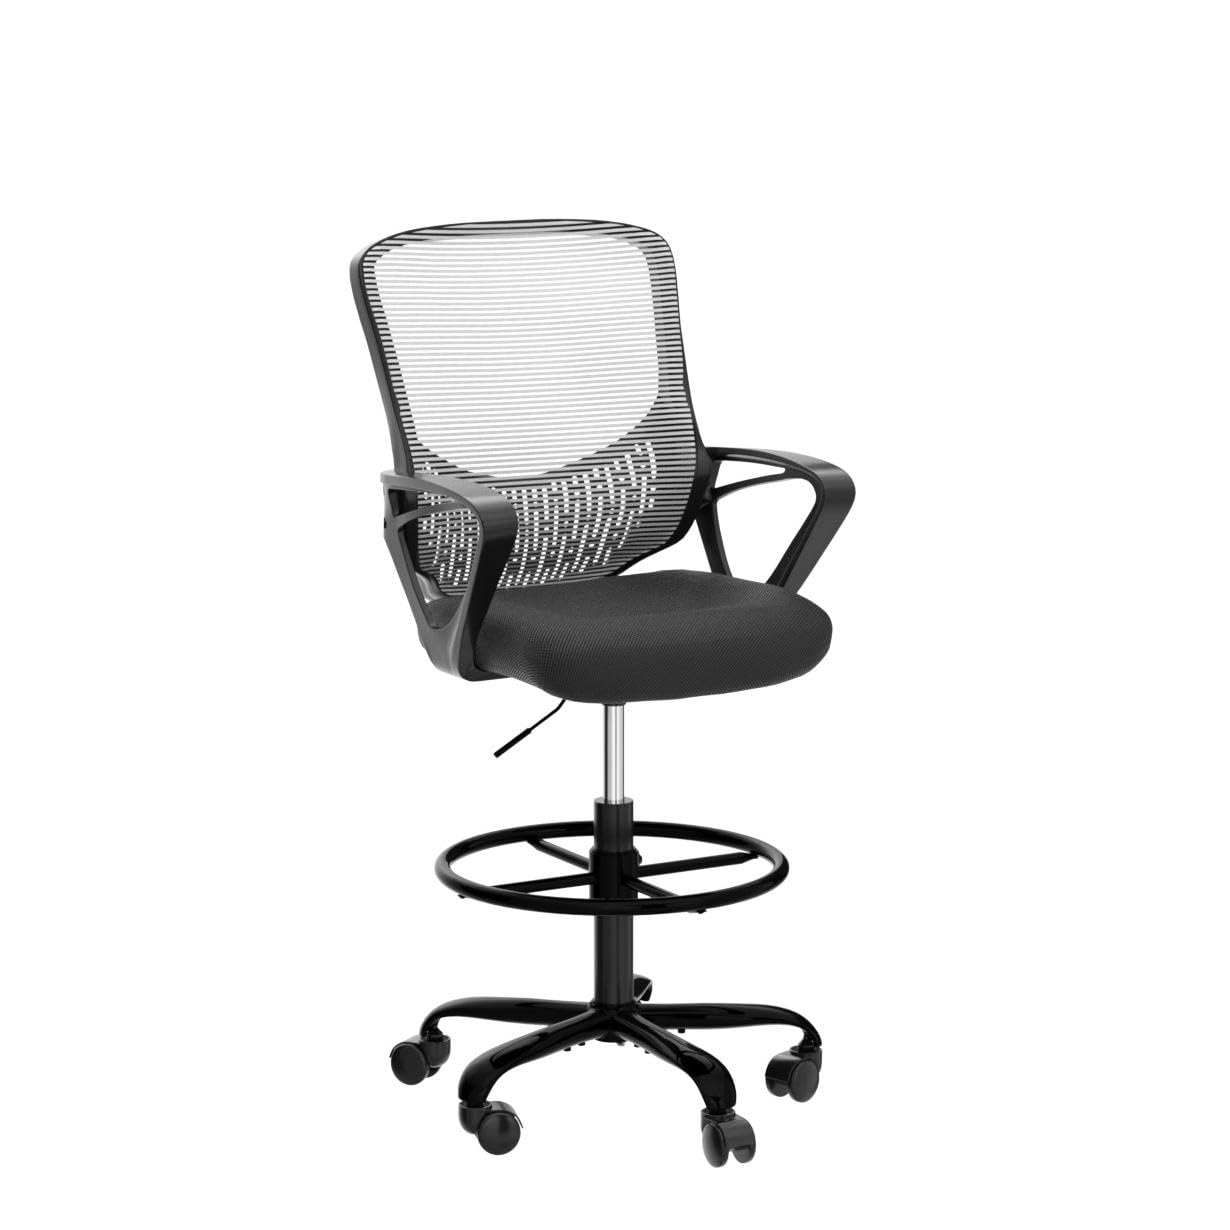 JHK Tall, Standing, Counter Computer, Mid-Back Mesh Office Drafting Chair with Armrests, Height Adjustable Foot Ring for Adults, Black